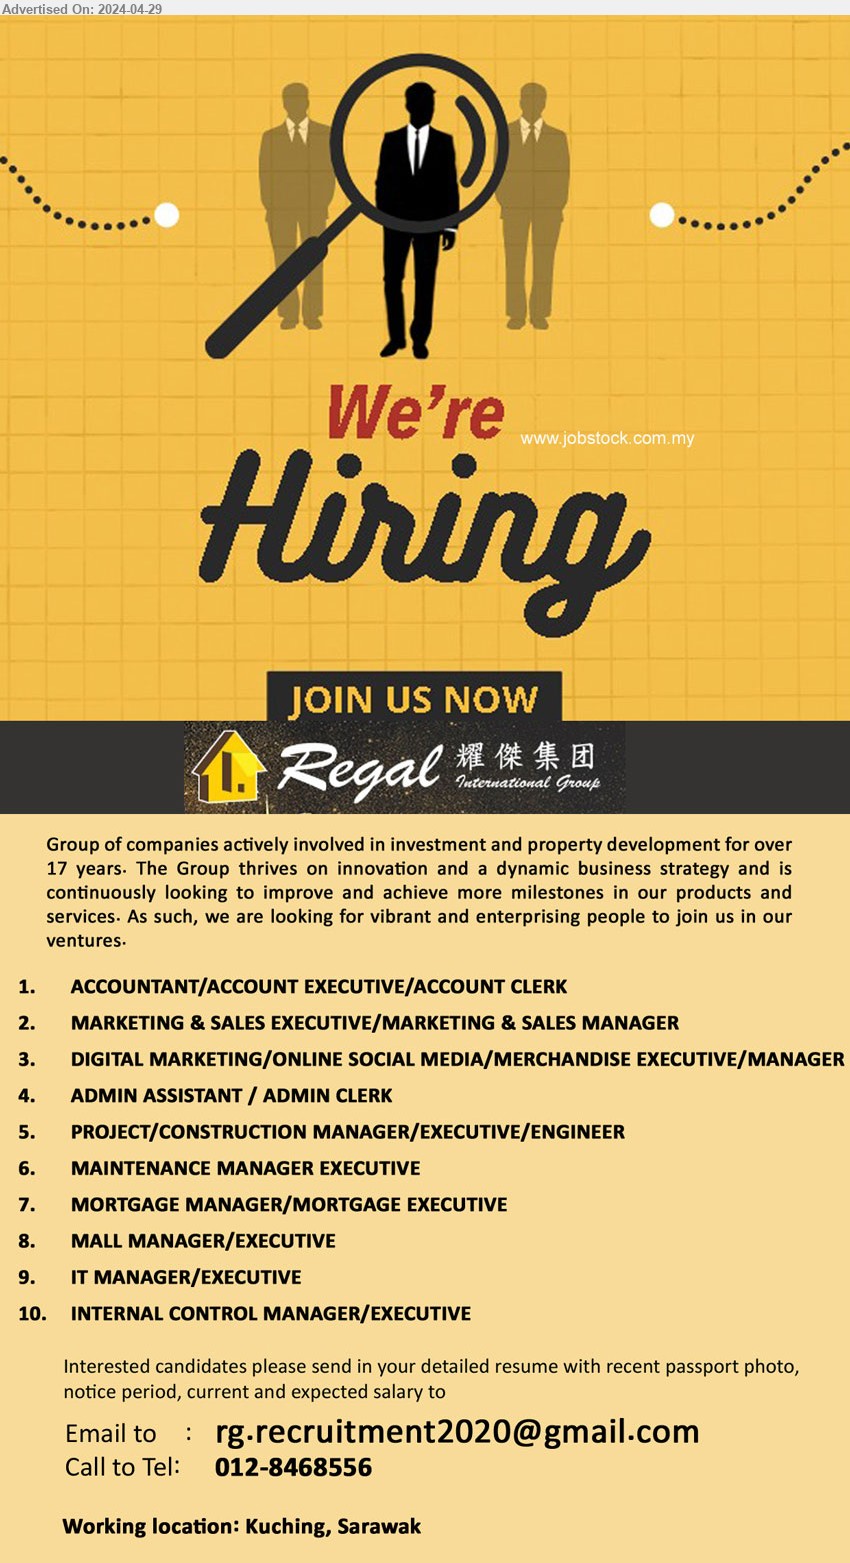 REGAL GROUP - 1. ACCOUNTANT/ACCOUNT EXECUTIVE/ACCOUNT CLERK (Kuching).
2. MARKETING & SALES EXECUTIVE/MARKETING & SALES MANAGER (Kuching).
3. DIGITAL MARKETING/ONLINE SOCIAL MEDIA/MERCHANDISE EXECUTIVE/MANAGER  (Kuching).
4. ADMIN ASSISTANT / ADMIN CLERK (Kuching).
5. PROJECT/CONSTRUCTION MANAGER/EXECUTIVE/ENGINEER (Kuching).
6. MAINTENANCE MANAGER EXECUTIVE (Kuching).
7. MORTGAGE MANAGER/MORTGAGE EXECUTIVE (Kuching).
8. MALL MANAGER/EXECUTIVE (Kuching).
9. IT MANAGER/EXECUTIVE (Kuching).
10. INTERNAL CONTROL MANAGER/EXECUTIVE (Kuching).
Call 012-8468556 /Email resume to ...